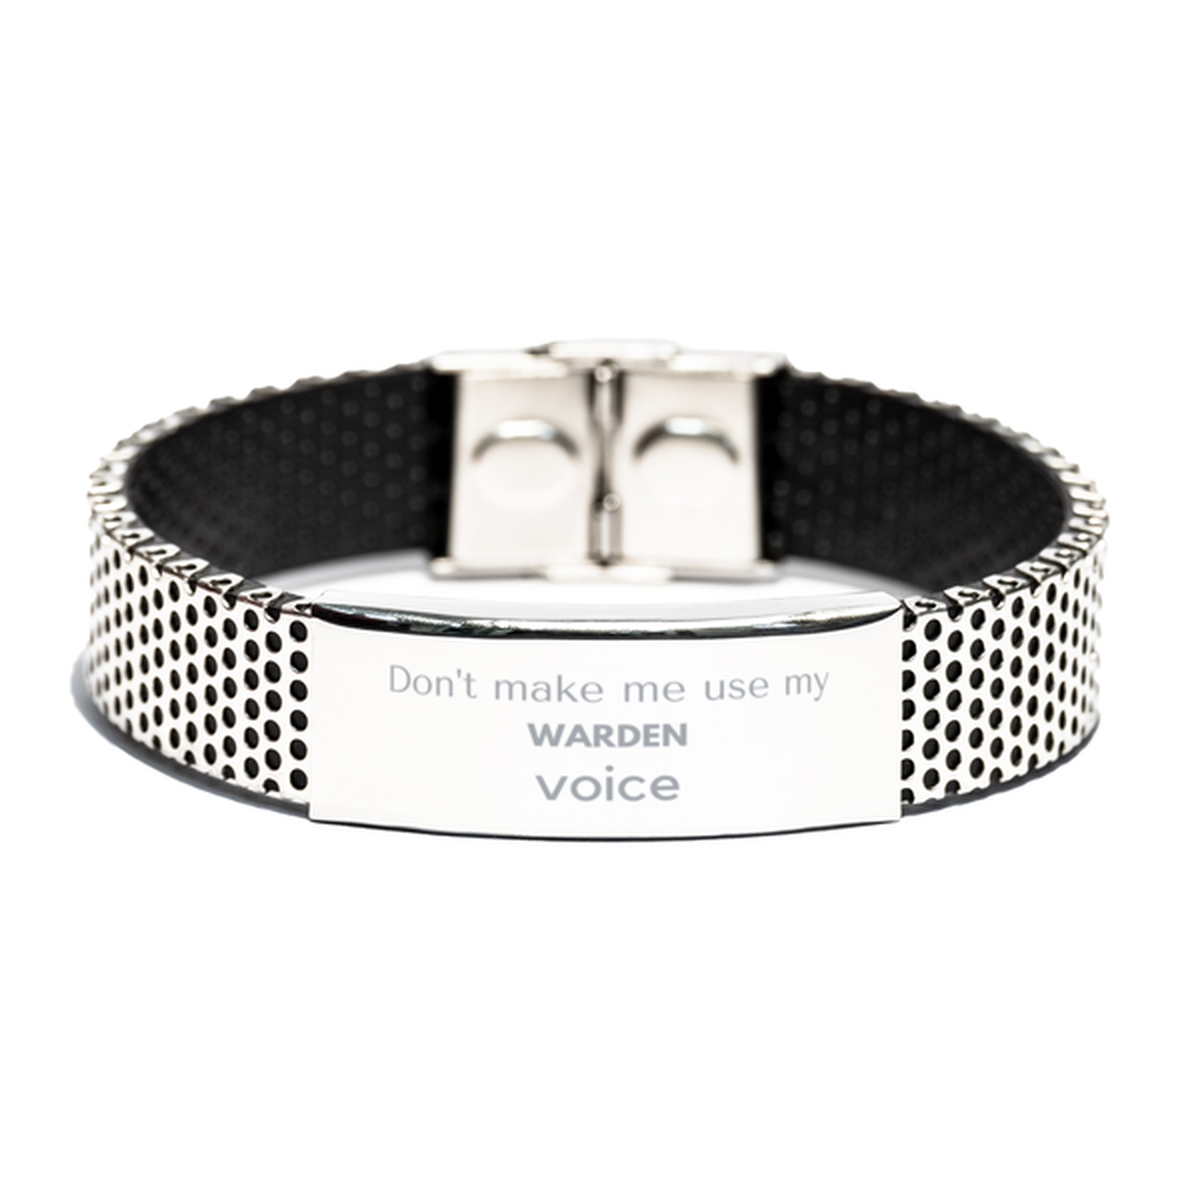 Don't make me use my Warden voice, Sarcasm Warden Gifts, Christmas Warden Stainless Steel Bracelet Birthday Unique Gifts For Warden Coworkers, Men, Women, Colleague, Friends